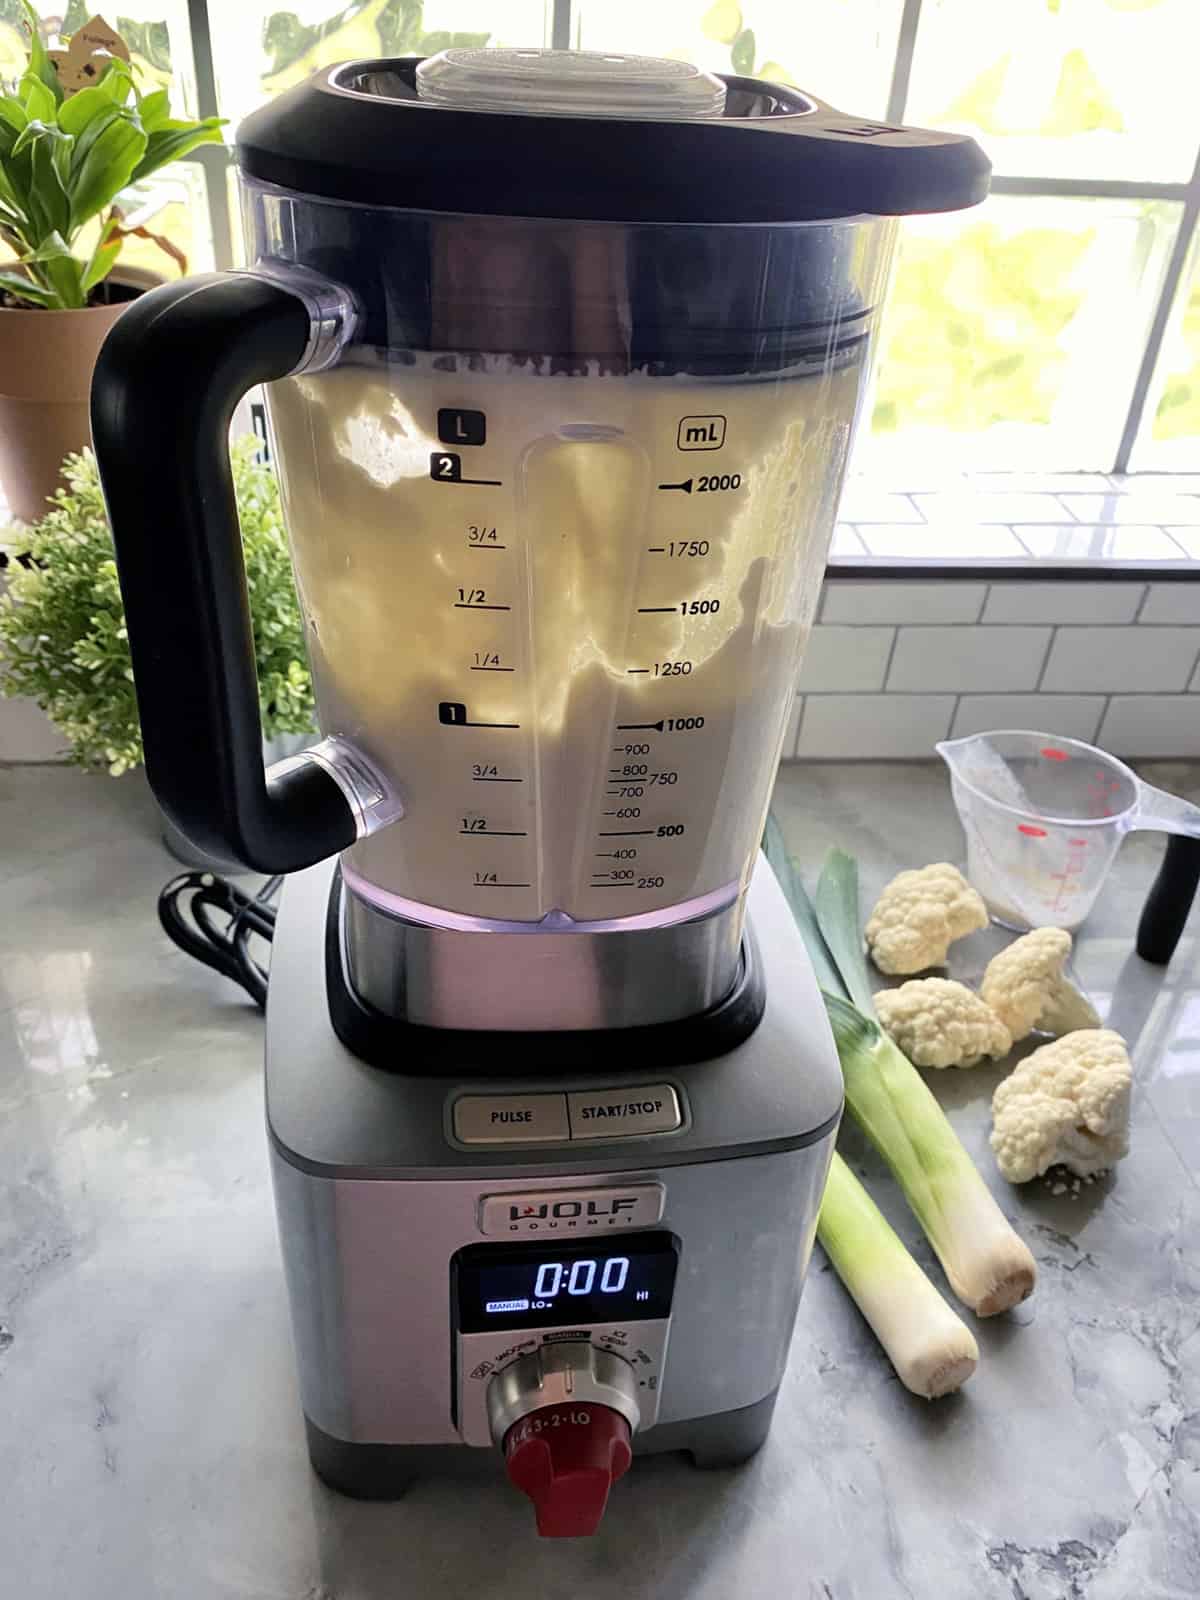 Cauliflower-Leek Puree in the blender on counter next to cauliflower, leeks, and a measuring cup.